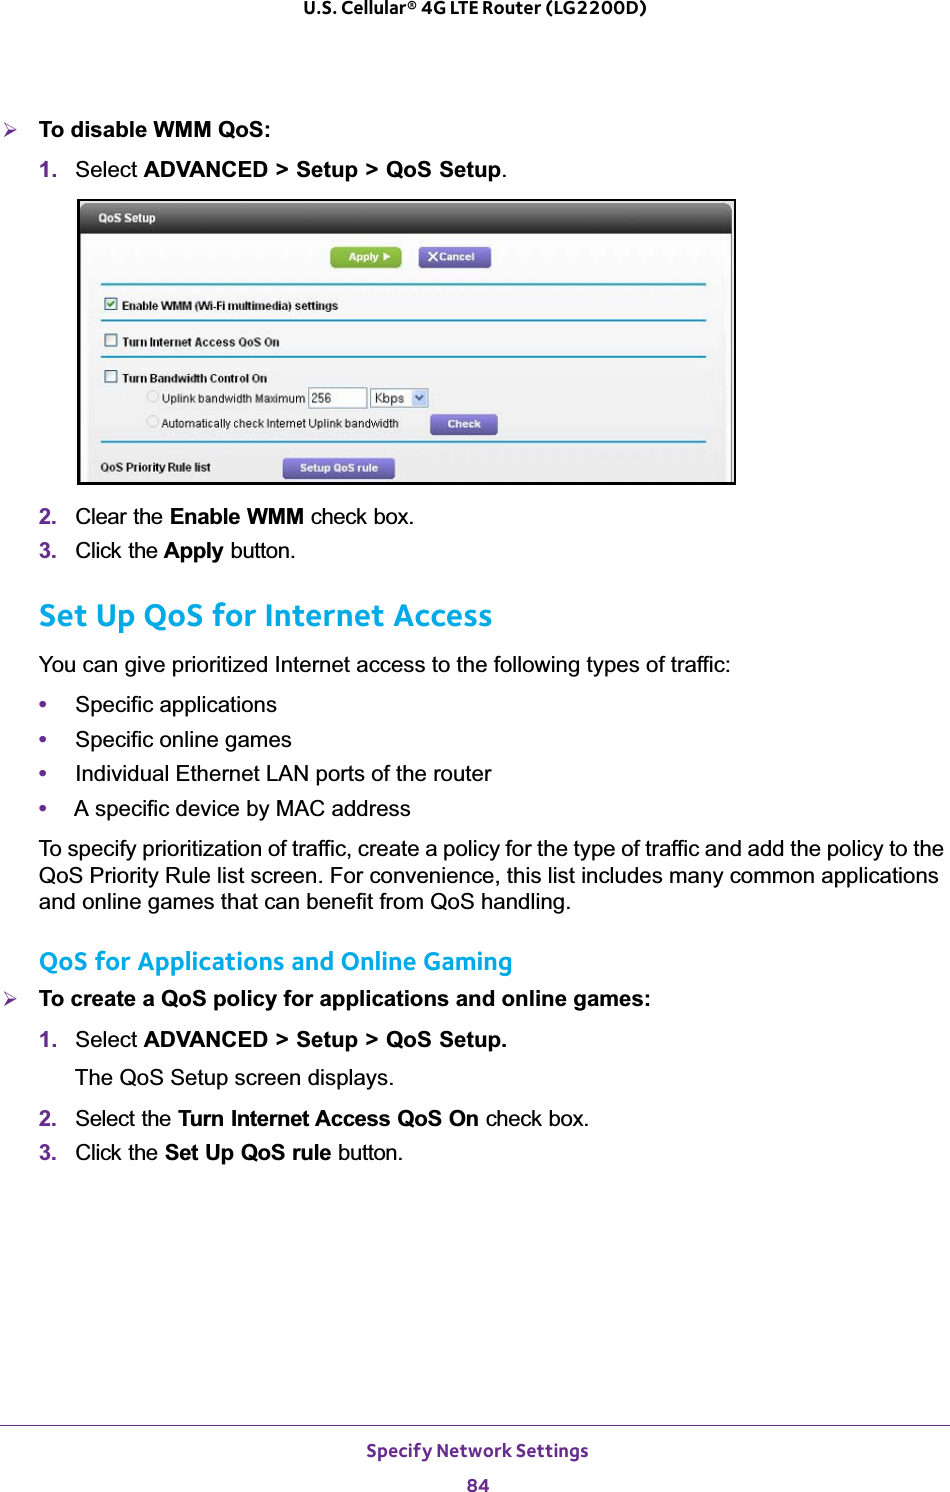 Specify Network Settings84U.S. Cellular® 4G LTE Router (LG2200D) ¾To disable WMM QoS: 1. Select ADVANCED &gt; Setup &gt; QoS Setup.2. Clear the Enable WMM check box.3. Click the Apply button.Set Up QoS for Internet AccessYou can give prioritized Internet access to the following types of traffic:•Specific applications•Specific online games•Individual Ethernet LAN ports of the router•A specific device by MAC addressTo specify prioritization of traffic, create a policy for the type of traffic and add the policy to the QoS Priority Rule list screen. For convenience, this list includes many common applications and online games that can benefit from QoS handling.QoS for Applications and Online Gaming¾To create a QoS policy for applications and online games:1. Select ADVANCED &gt; Setup &gt; QoS Setup.The QoS Setup screen displays.2. Select the Turn Internet Access QoS On check box.3. Click the Set Up QoS rule button.